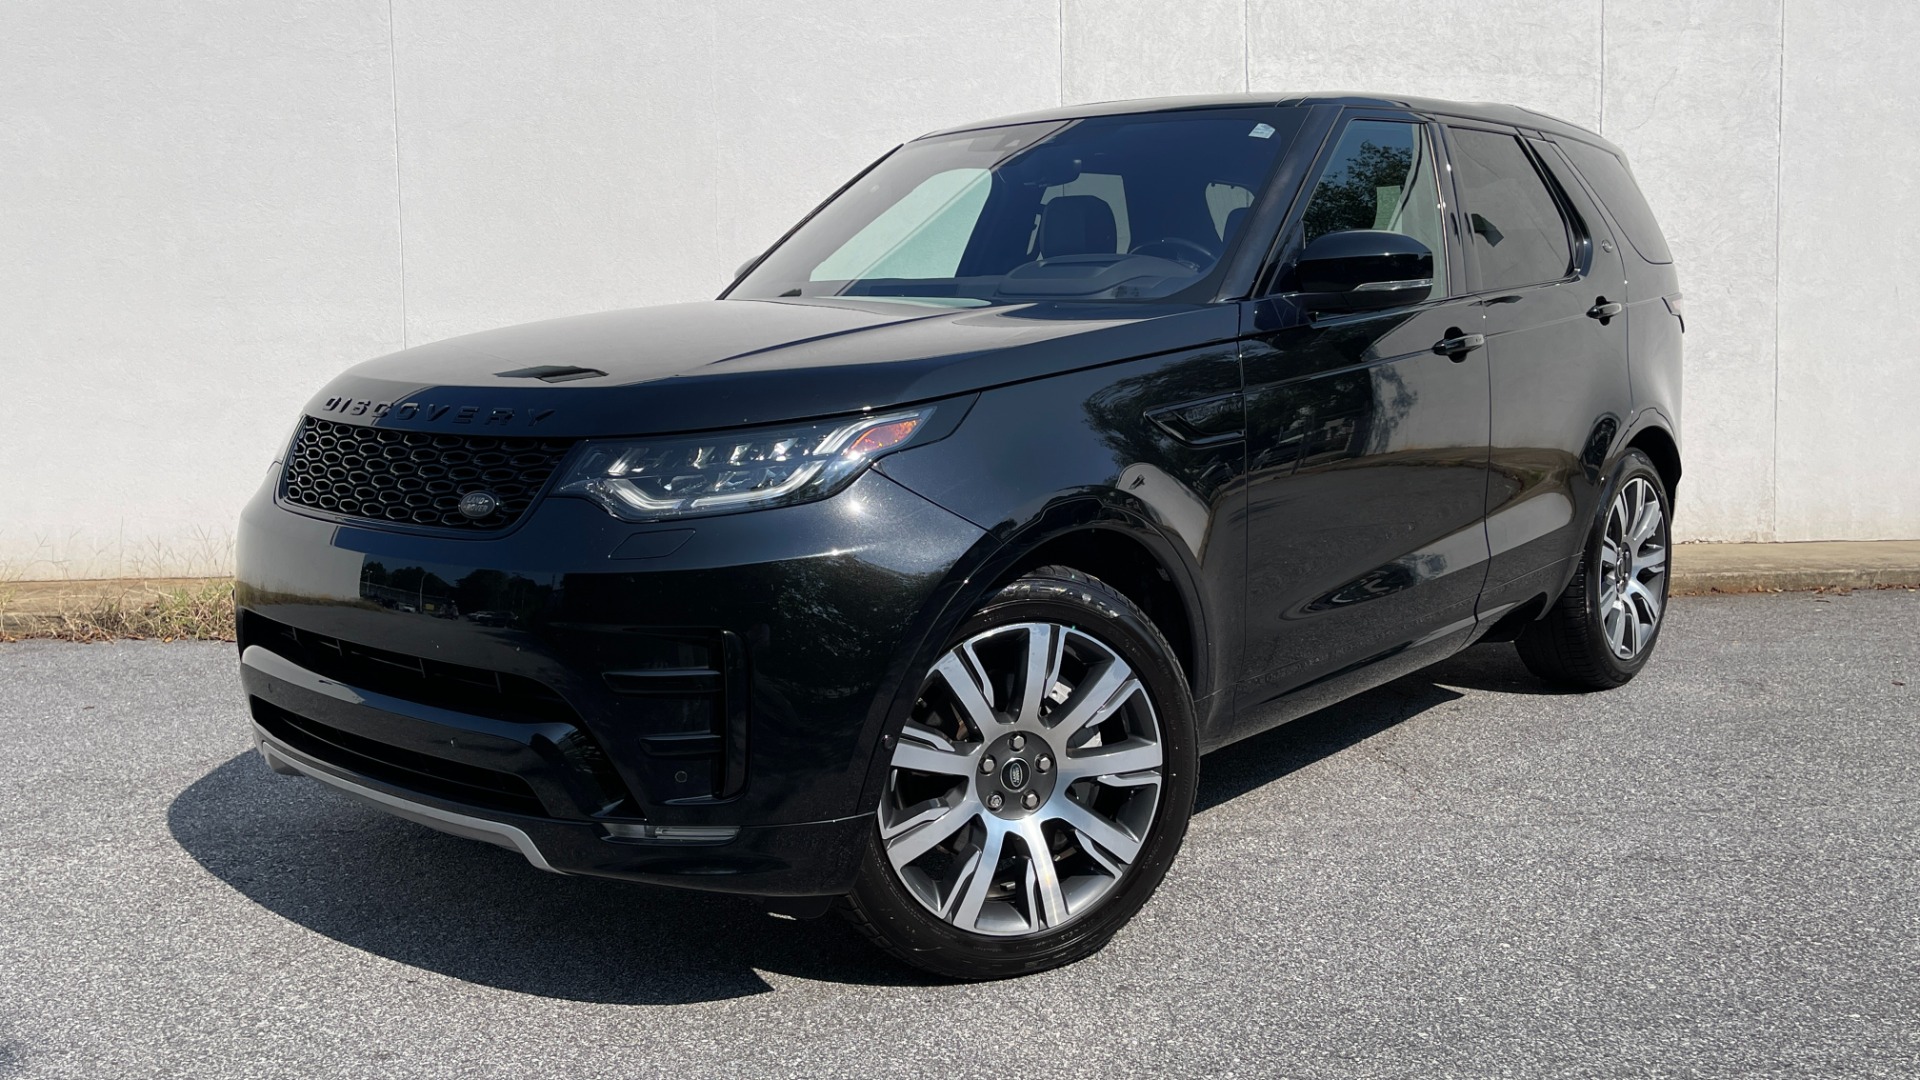 Used 2019 Land Rover Discovery HSE / SEVEN SEAT / DYNAMIC PACKAGE / 21IN WHEELS / REMOTE SEAT PACKAGE for sale $36,500 at Formula Imports in Charlotte NC 28227 1